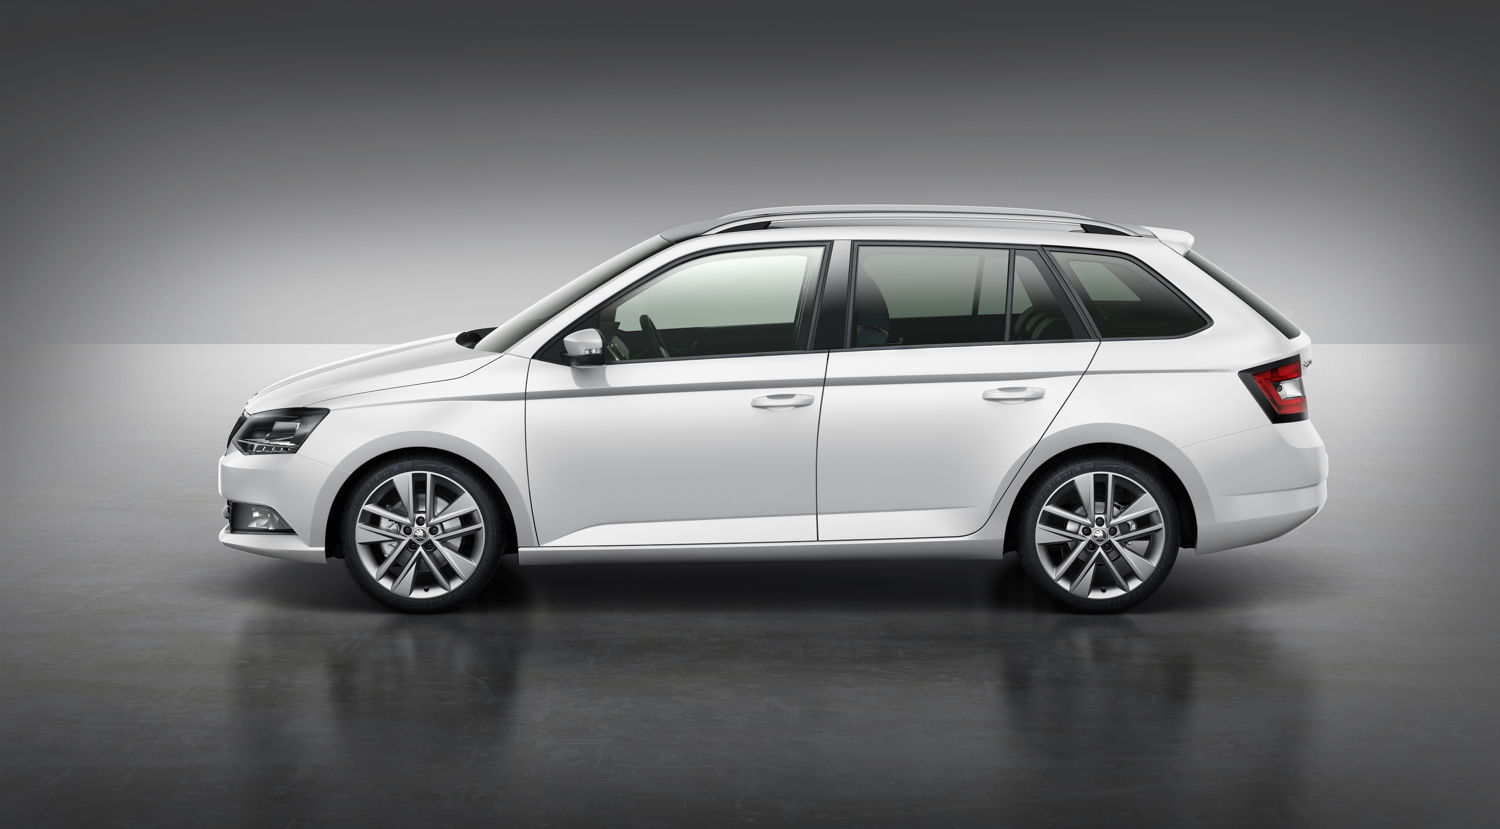 The ŠKODA Fabia Combi (photo) was a key contributor to the company’s growth last month, recording an increase of 230% compared to the same period last year. 